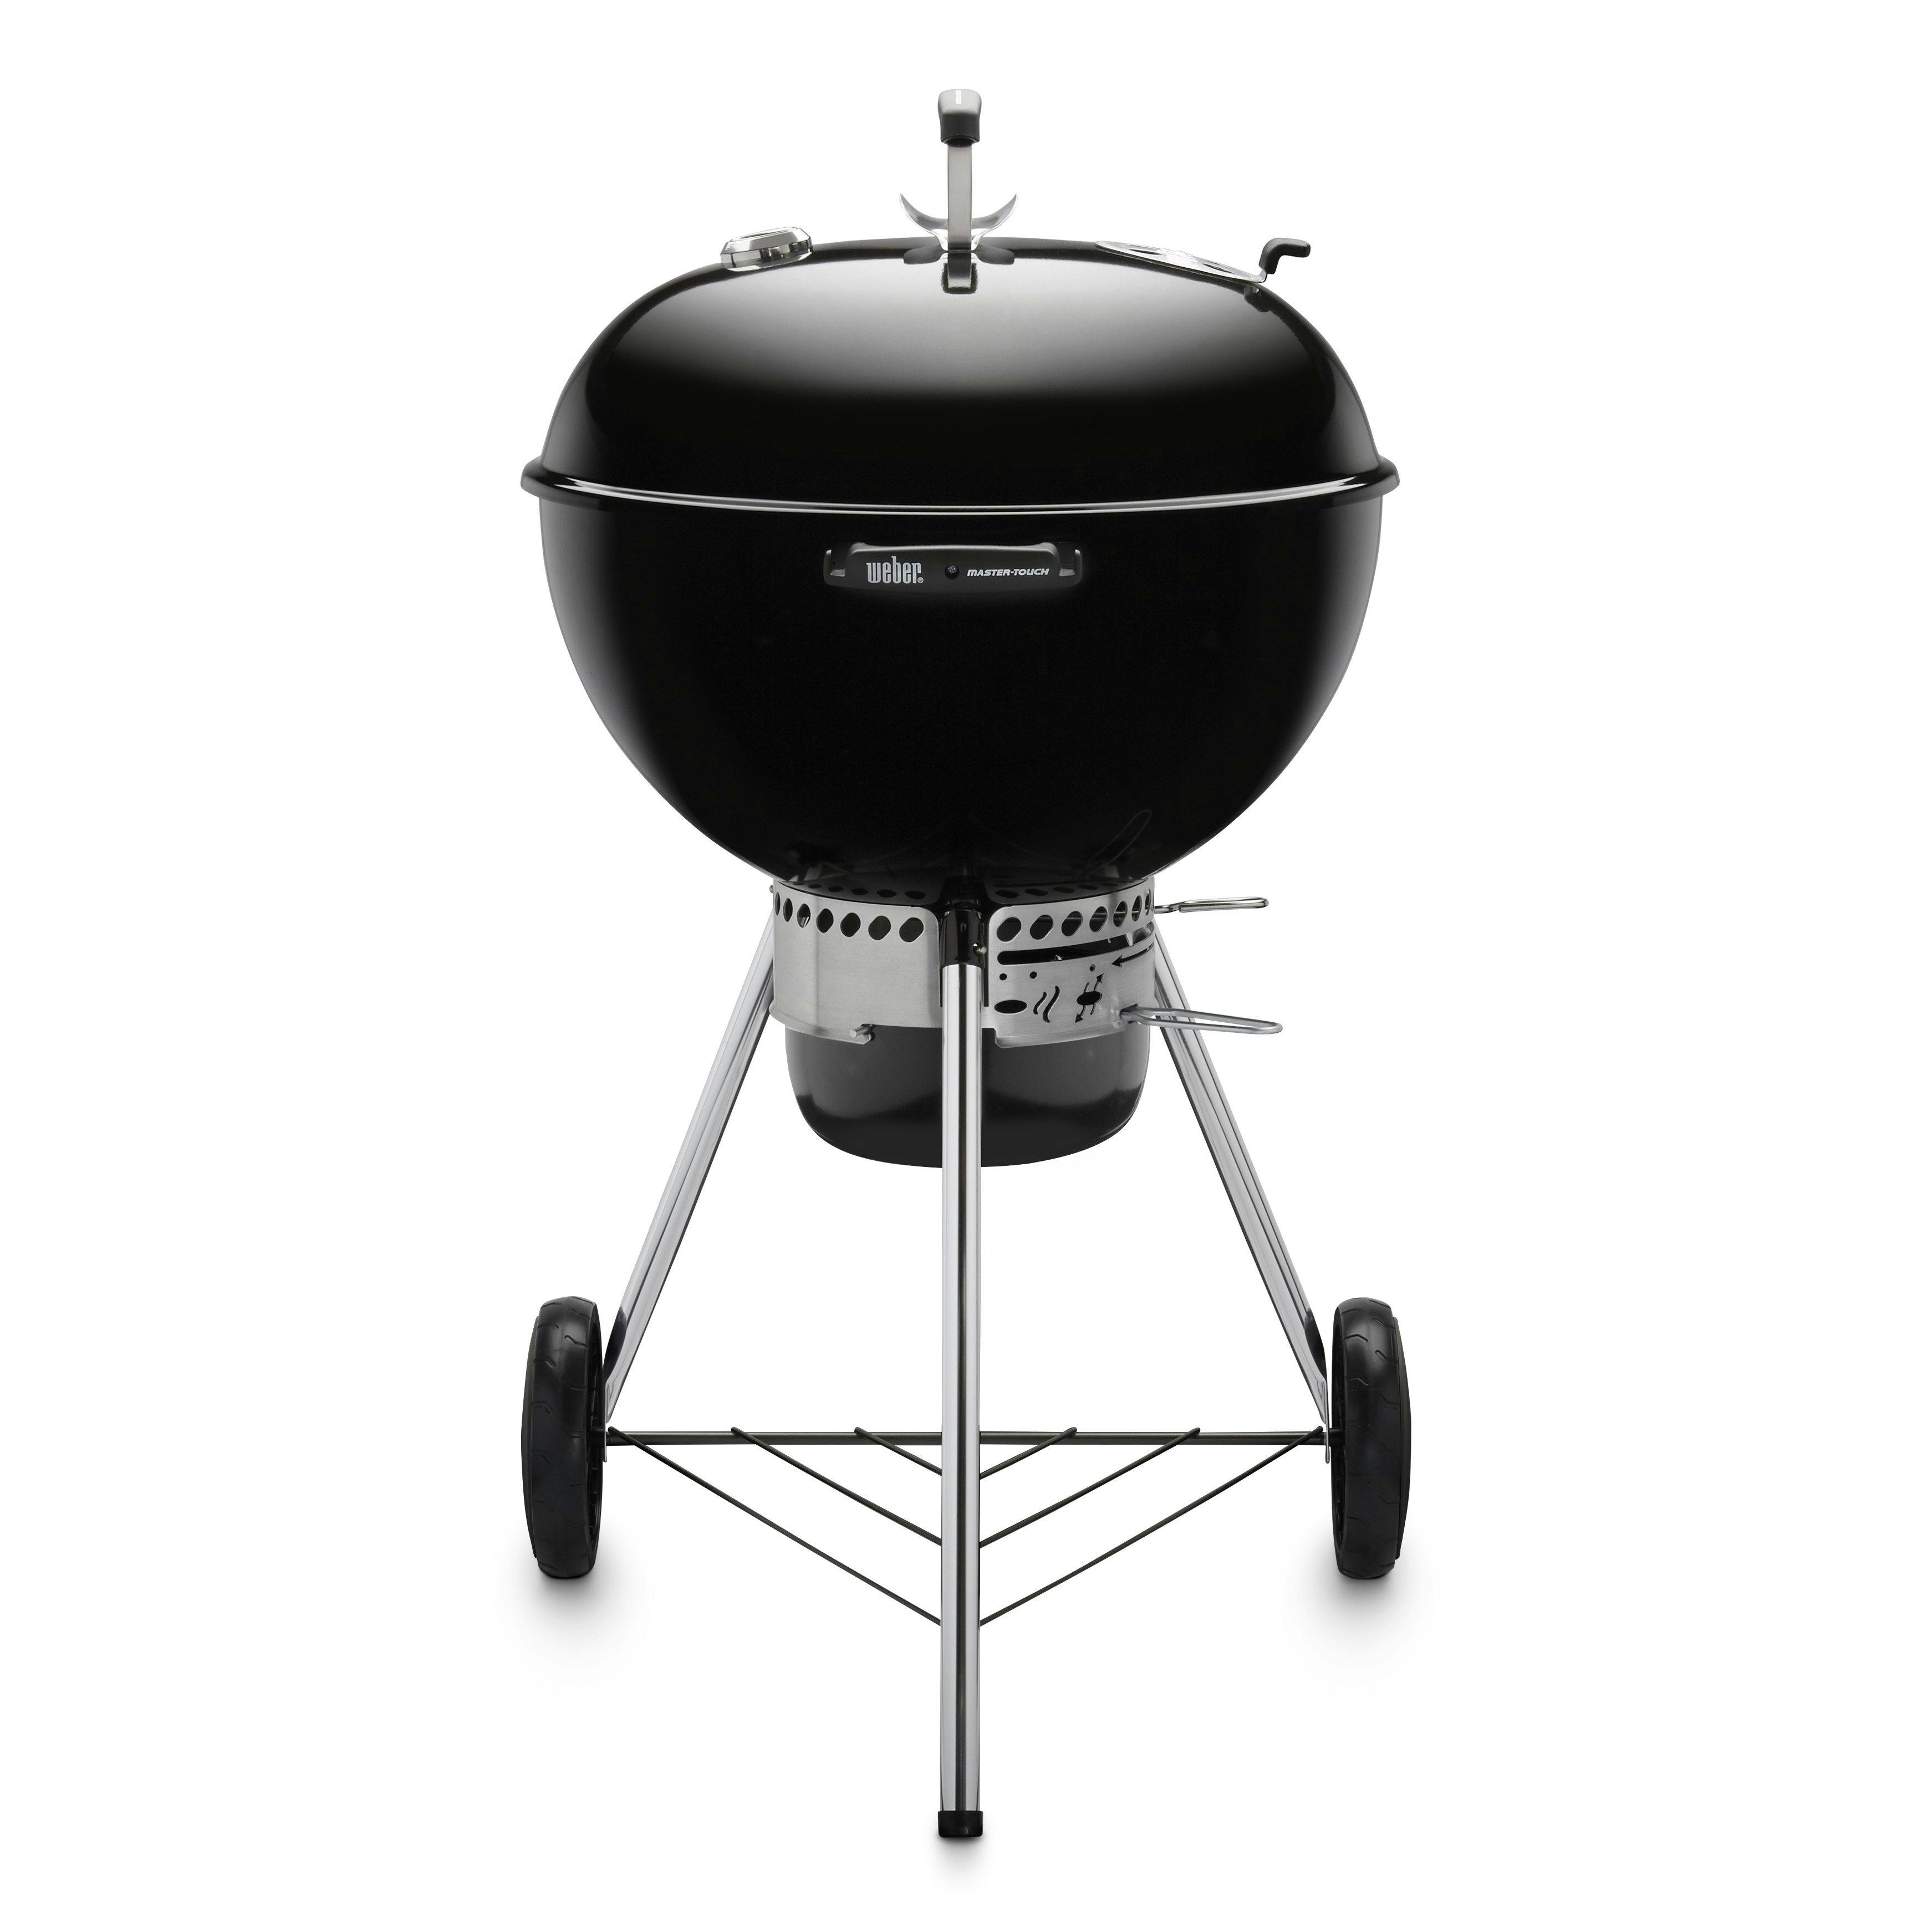 https://huckberry.imgix.net/spree/products/706670/original/82274_Weber_Master-Touch_22in_Charcoal_Grill_Black_01.jpg?auto=format%2C%20compress&crop=top&fit=clip&cs=tinysrgb&ixlib=react-9.5.2